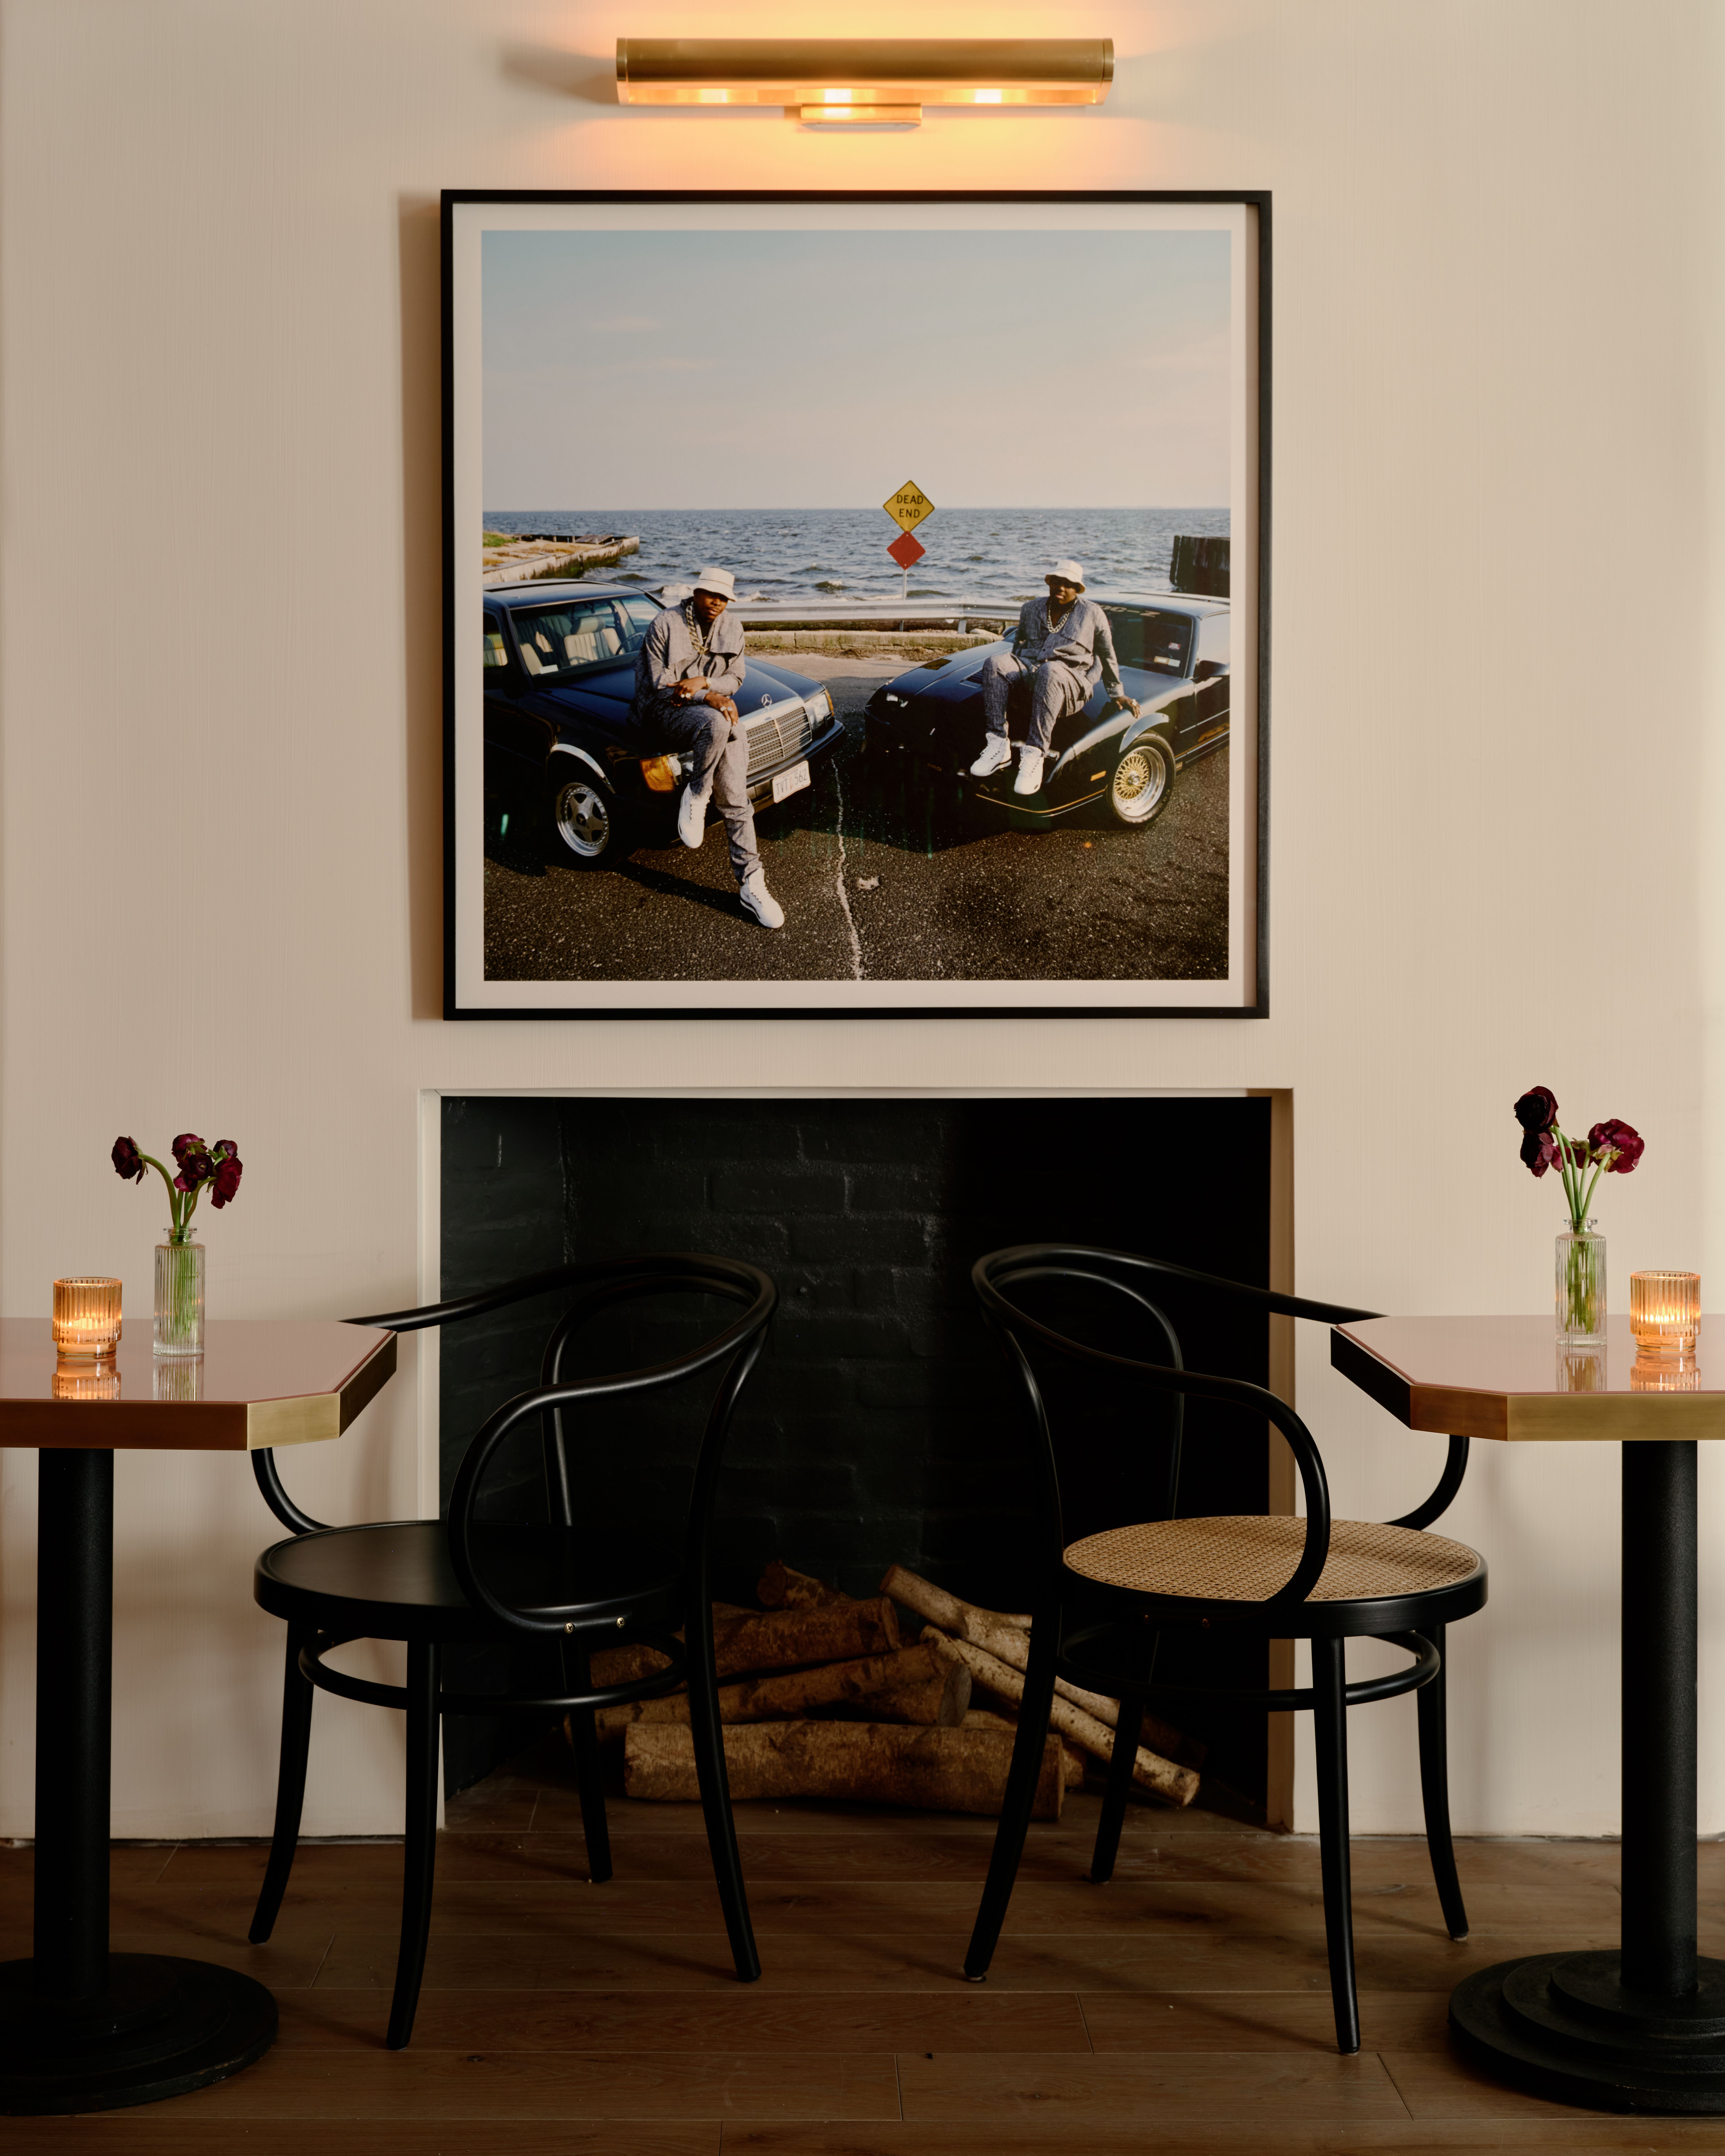 A photograph by Janette Beckman sits on top of the bar's fireplace